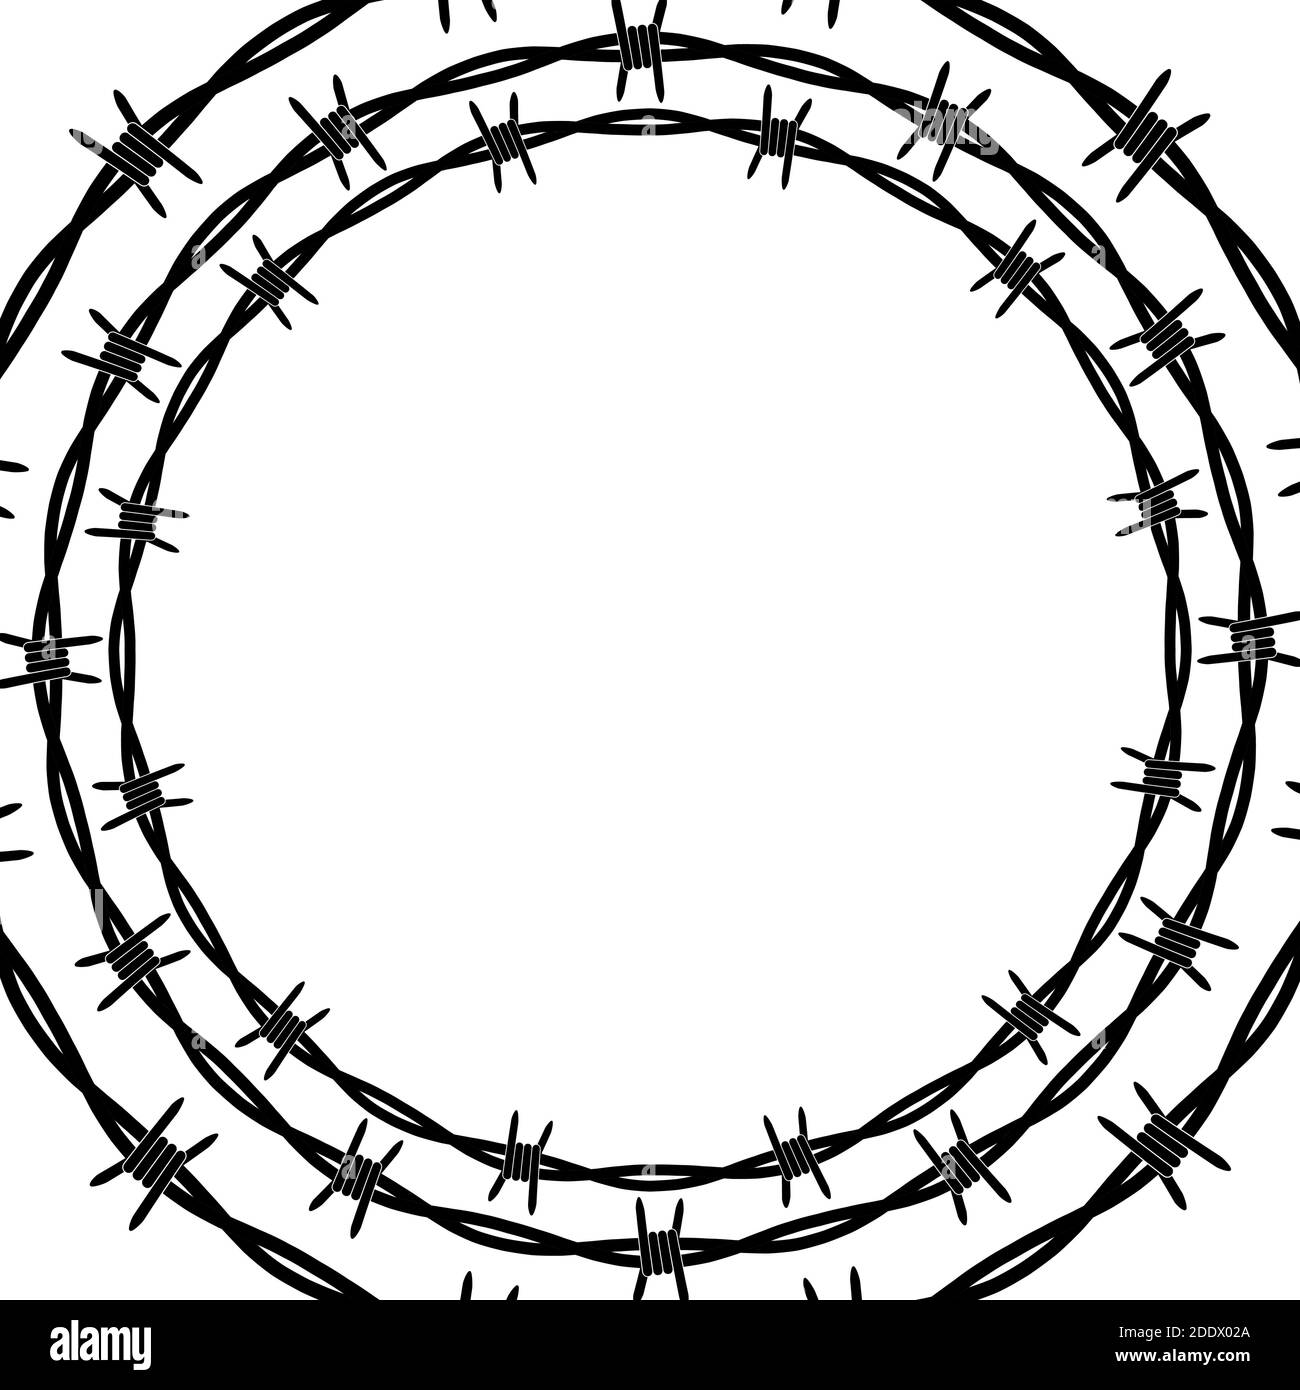 Disease, conclusion symbol, sign. Barbed wire background. Vector Illustration EPS10 Stock Vector